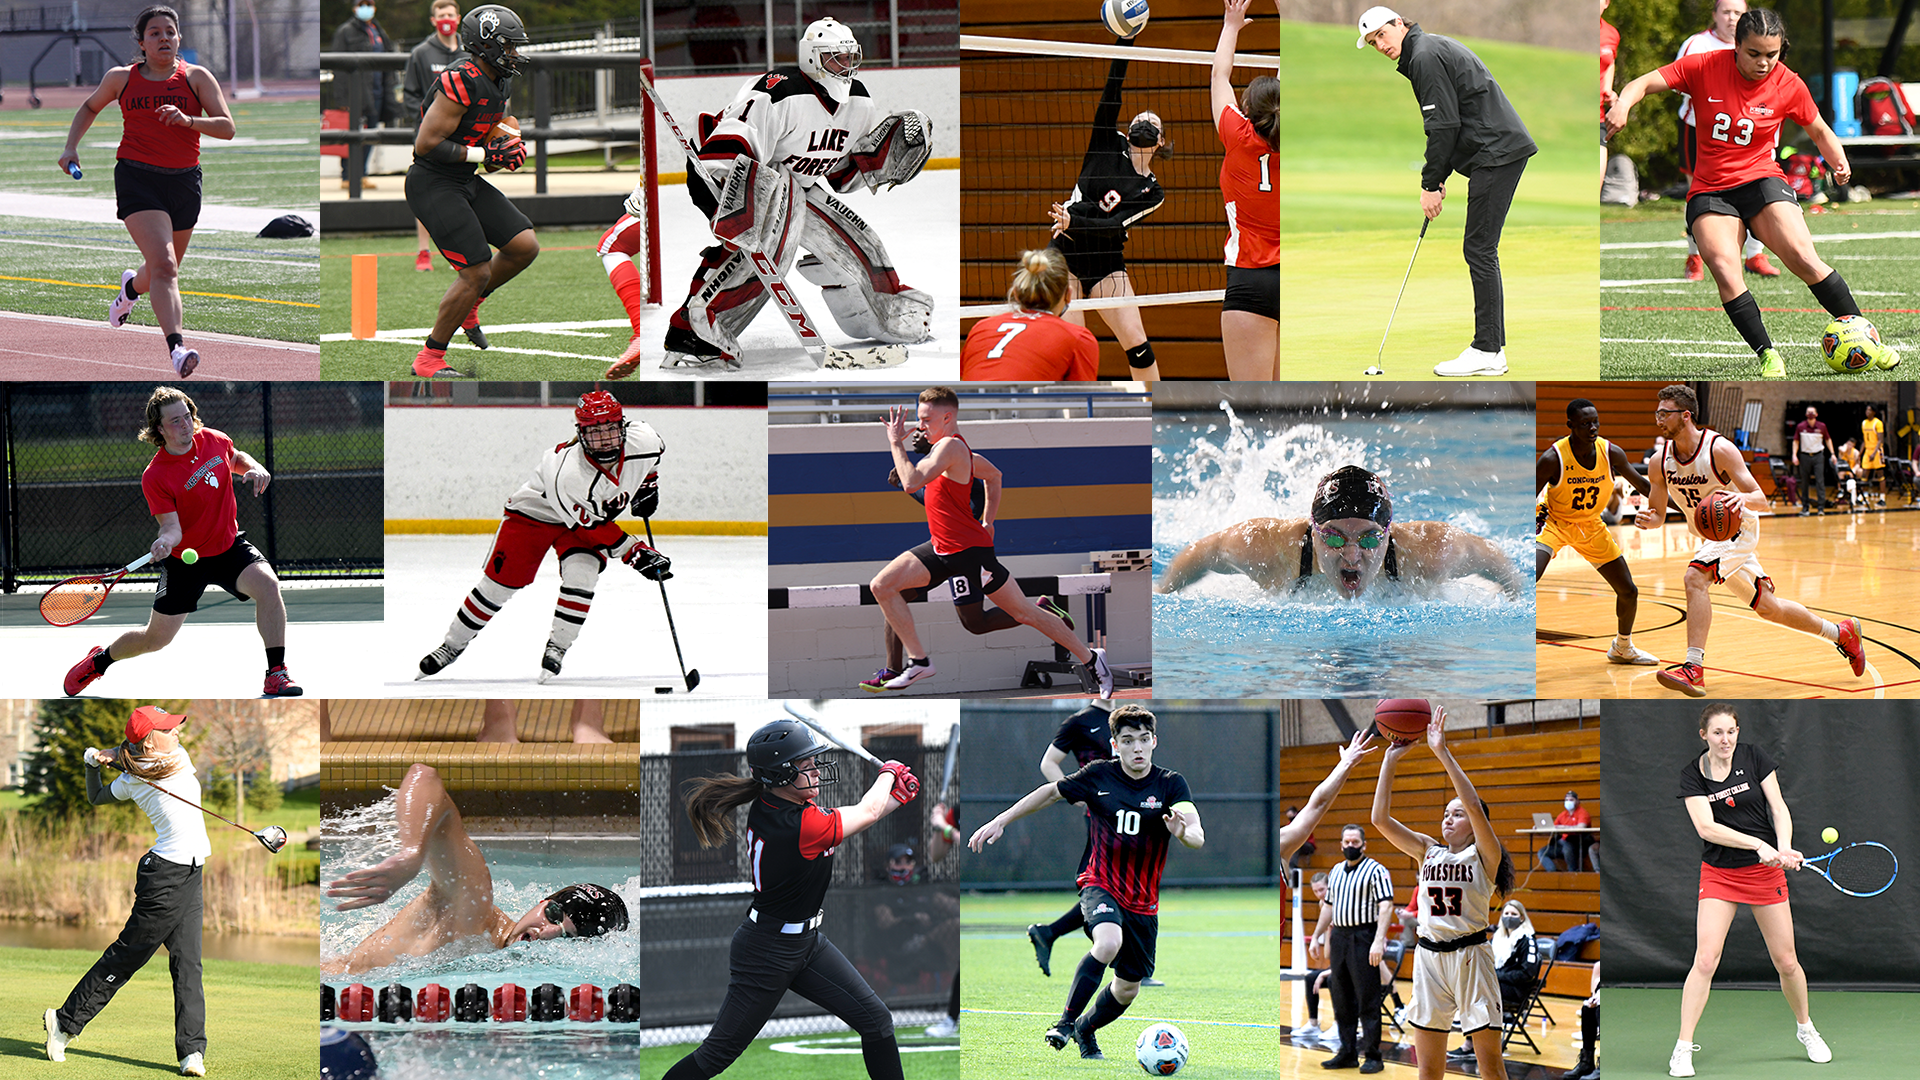 2020-21: Sports Return to Lake Forest College